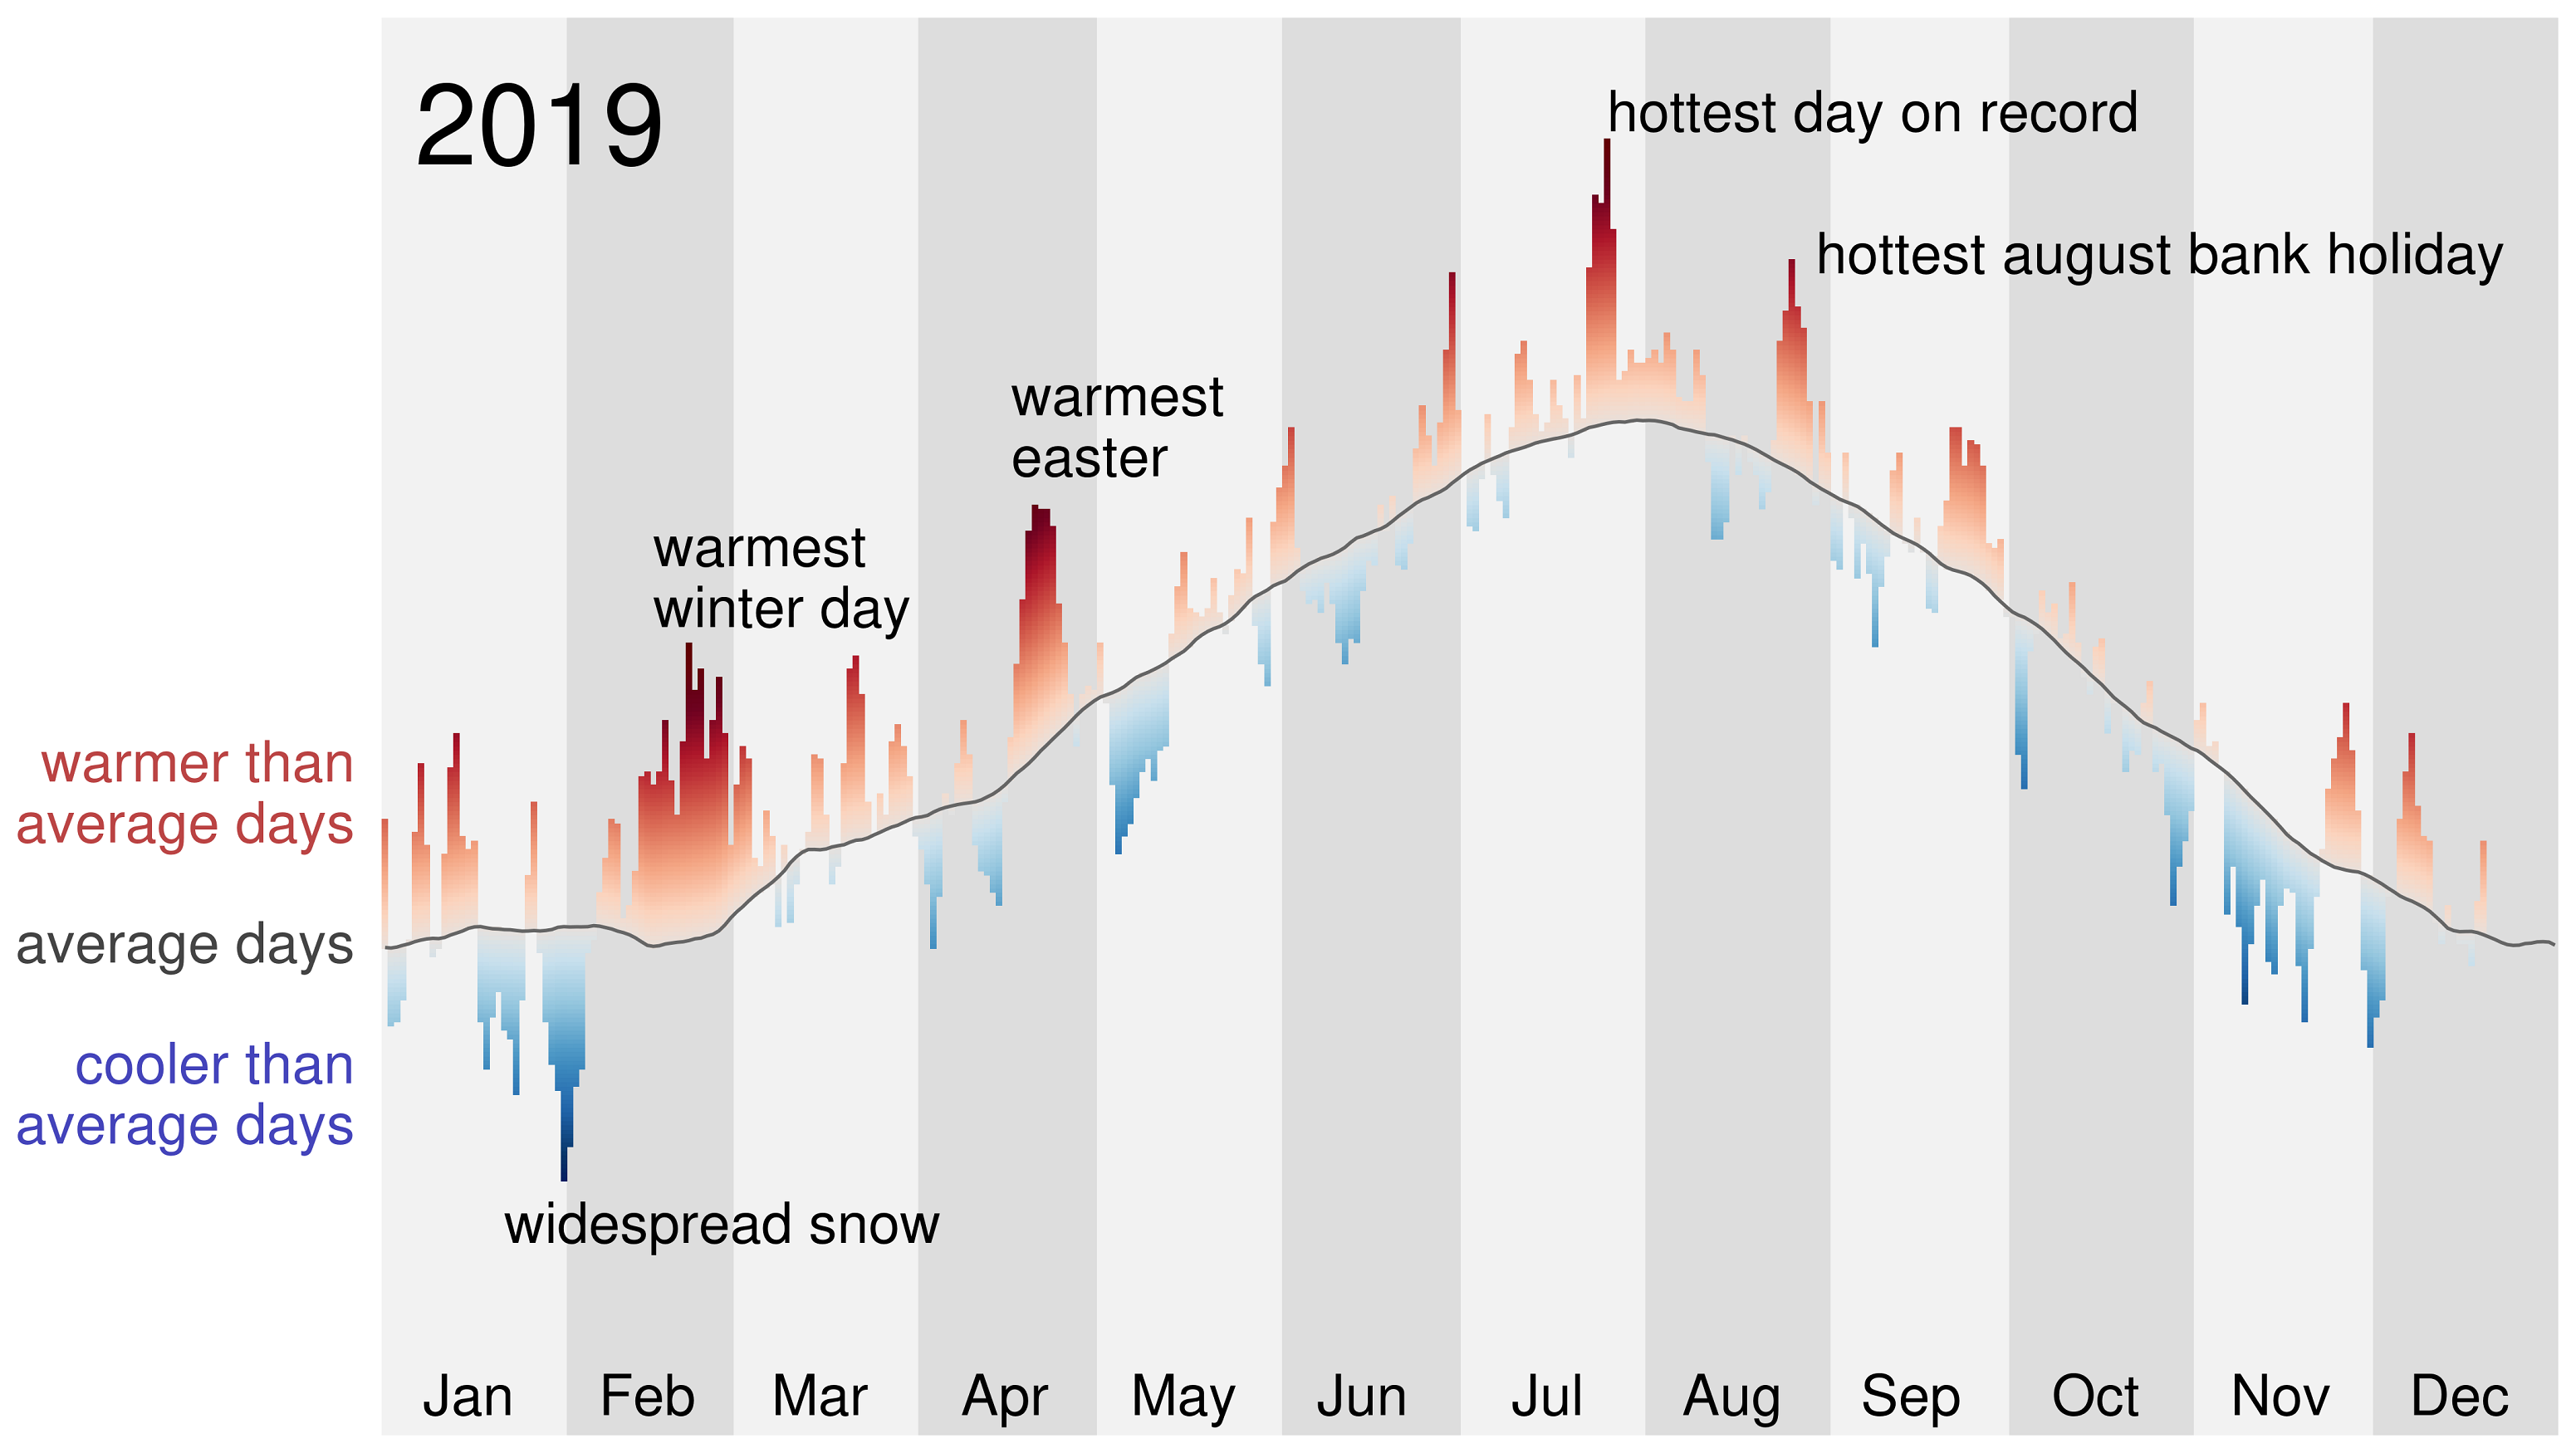 Chart showing warmer and cooler than average days in 2019. Widespread snow in January and February marked a spike of cooler than average days. Through February, there were many warmer than average days, marking the warmest winter day. In April, we saw the warmest Easter Monday. The hottest day on record was recorded in July, followed by the hottest late August bank holiday.